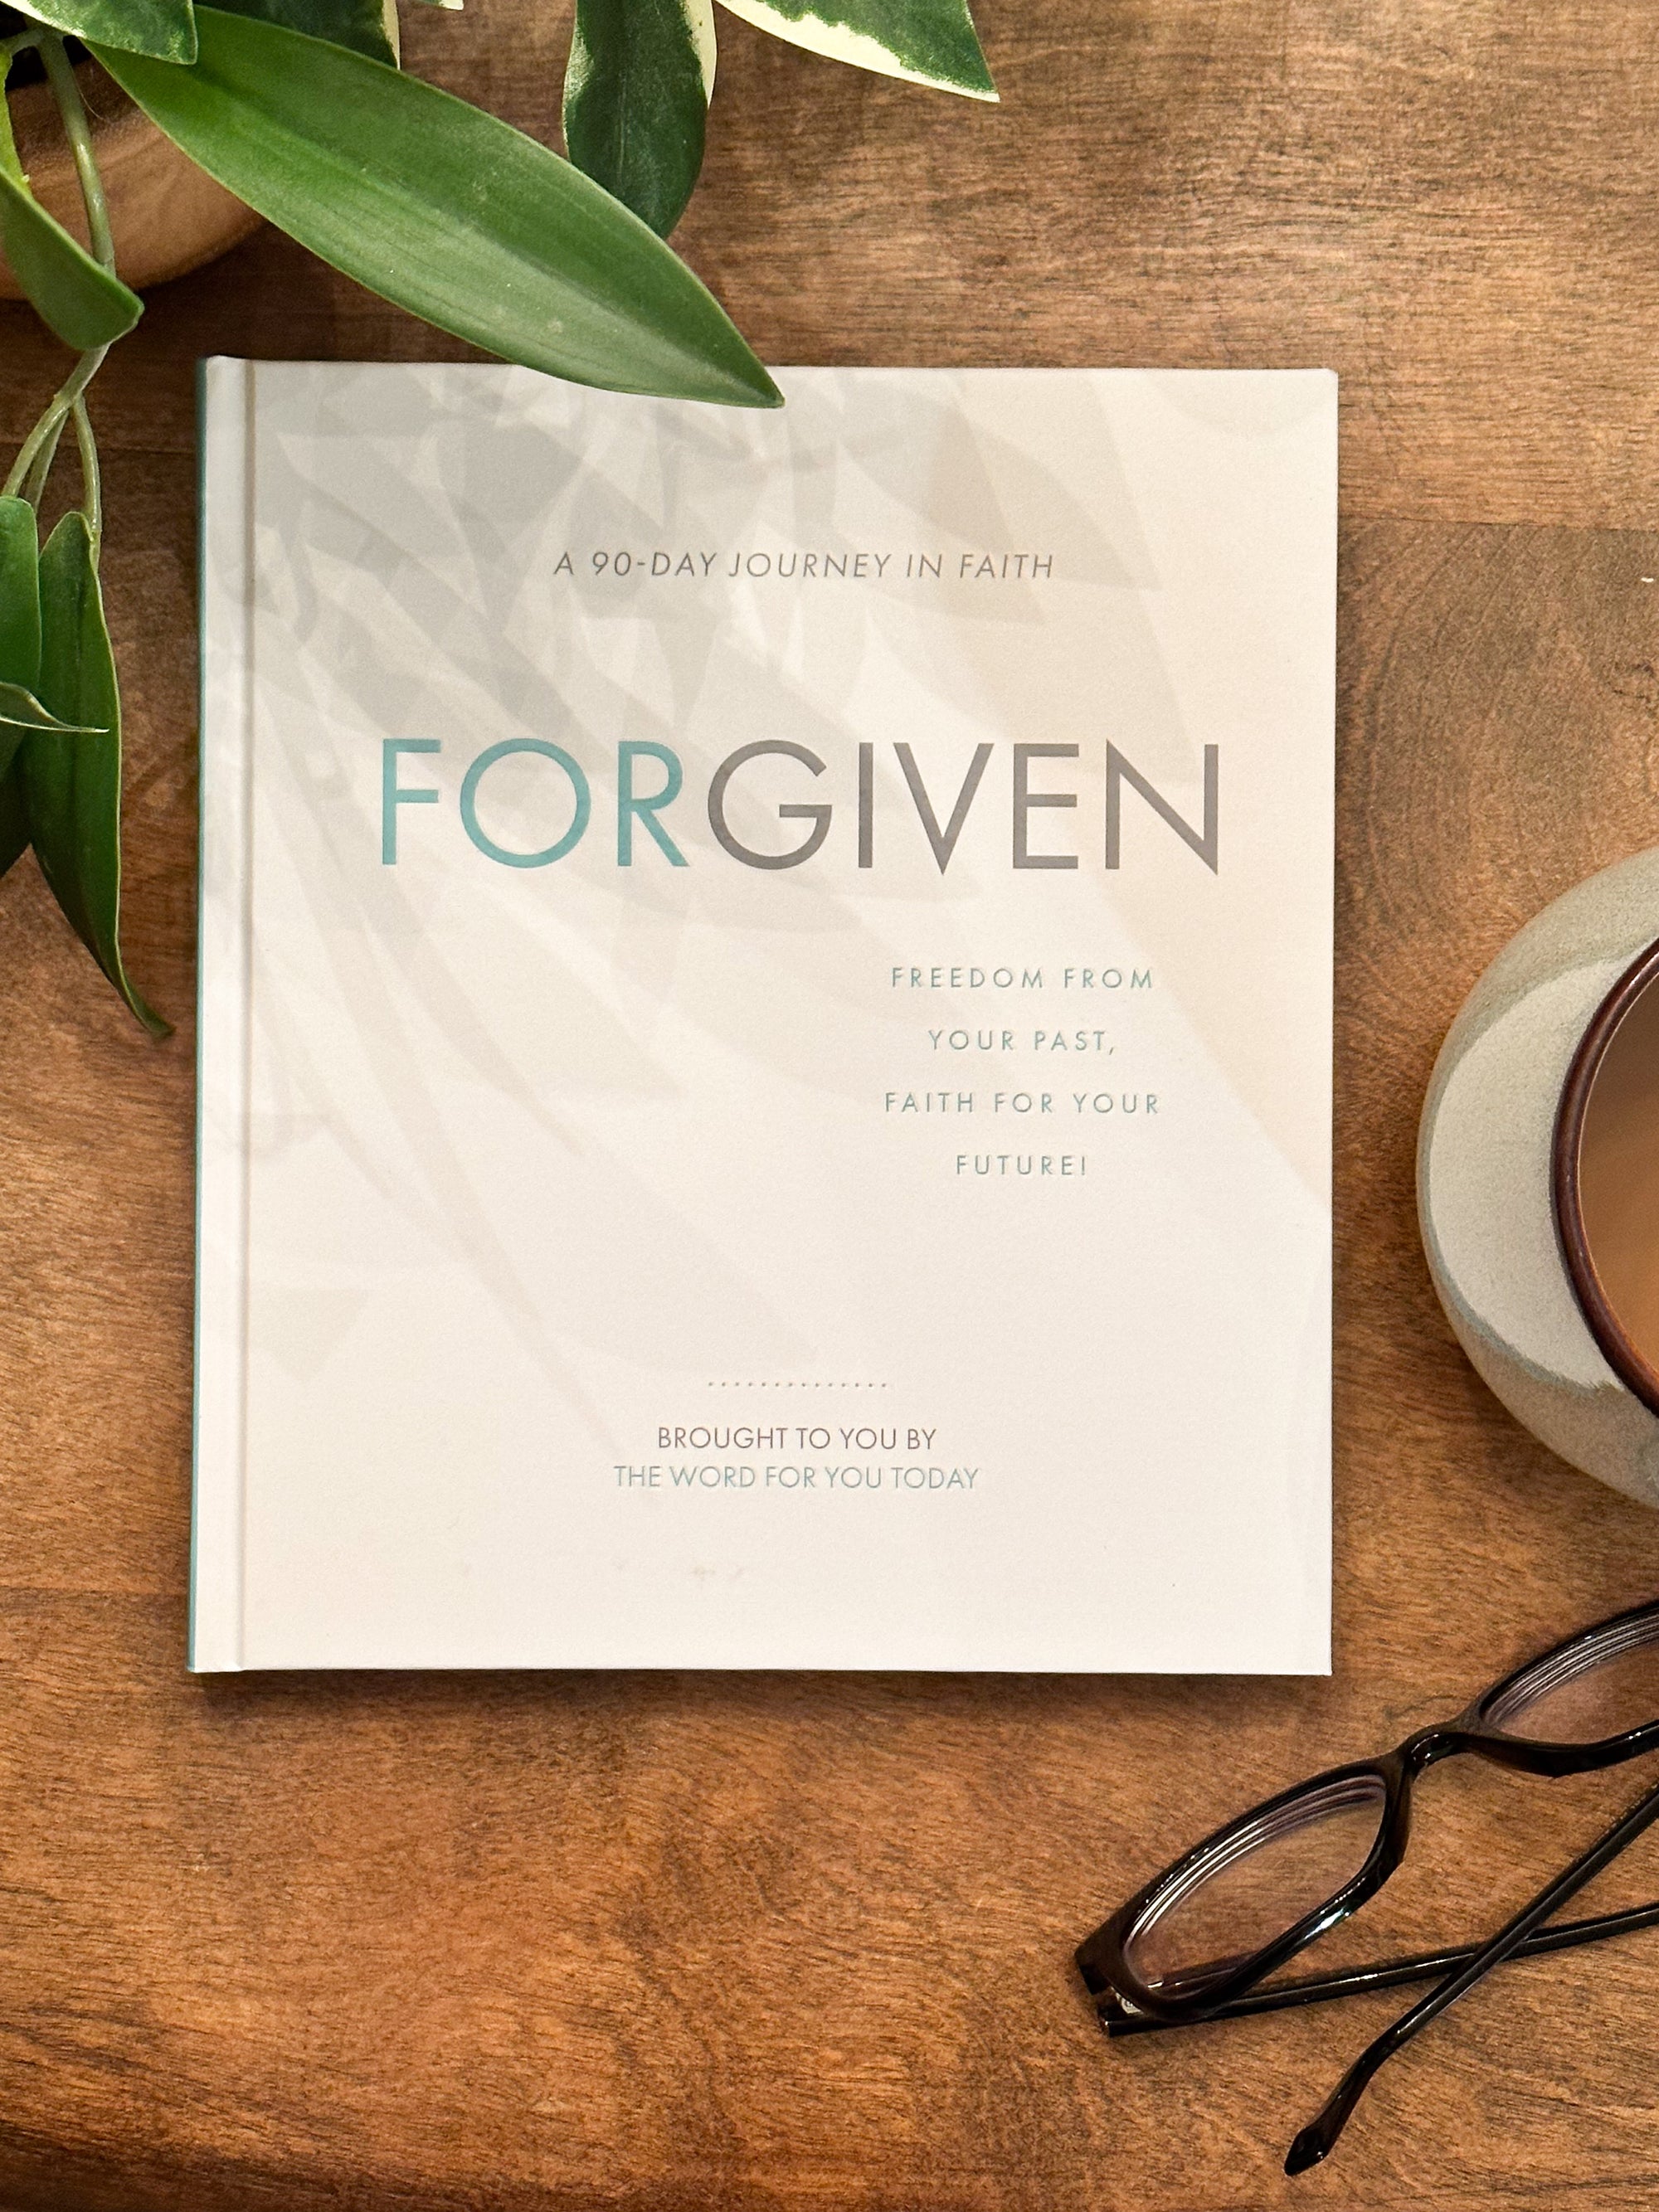 Forgiven: Freedom From Your Past, Faith For Your Future!